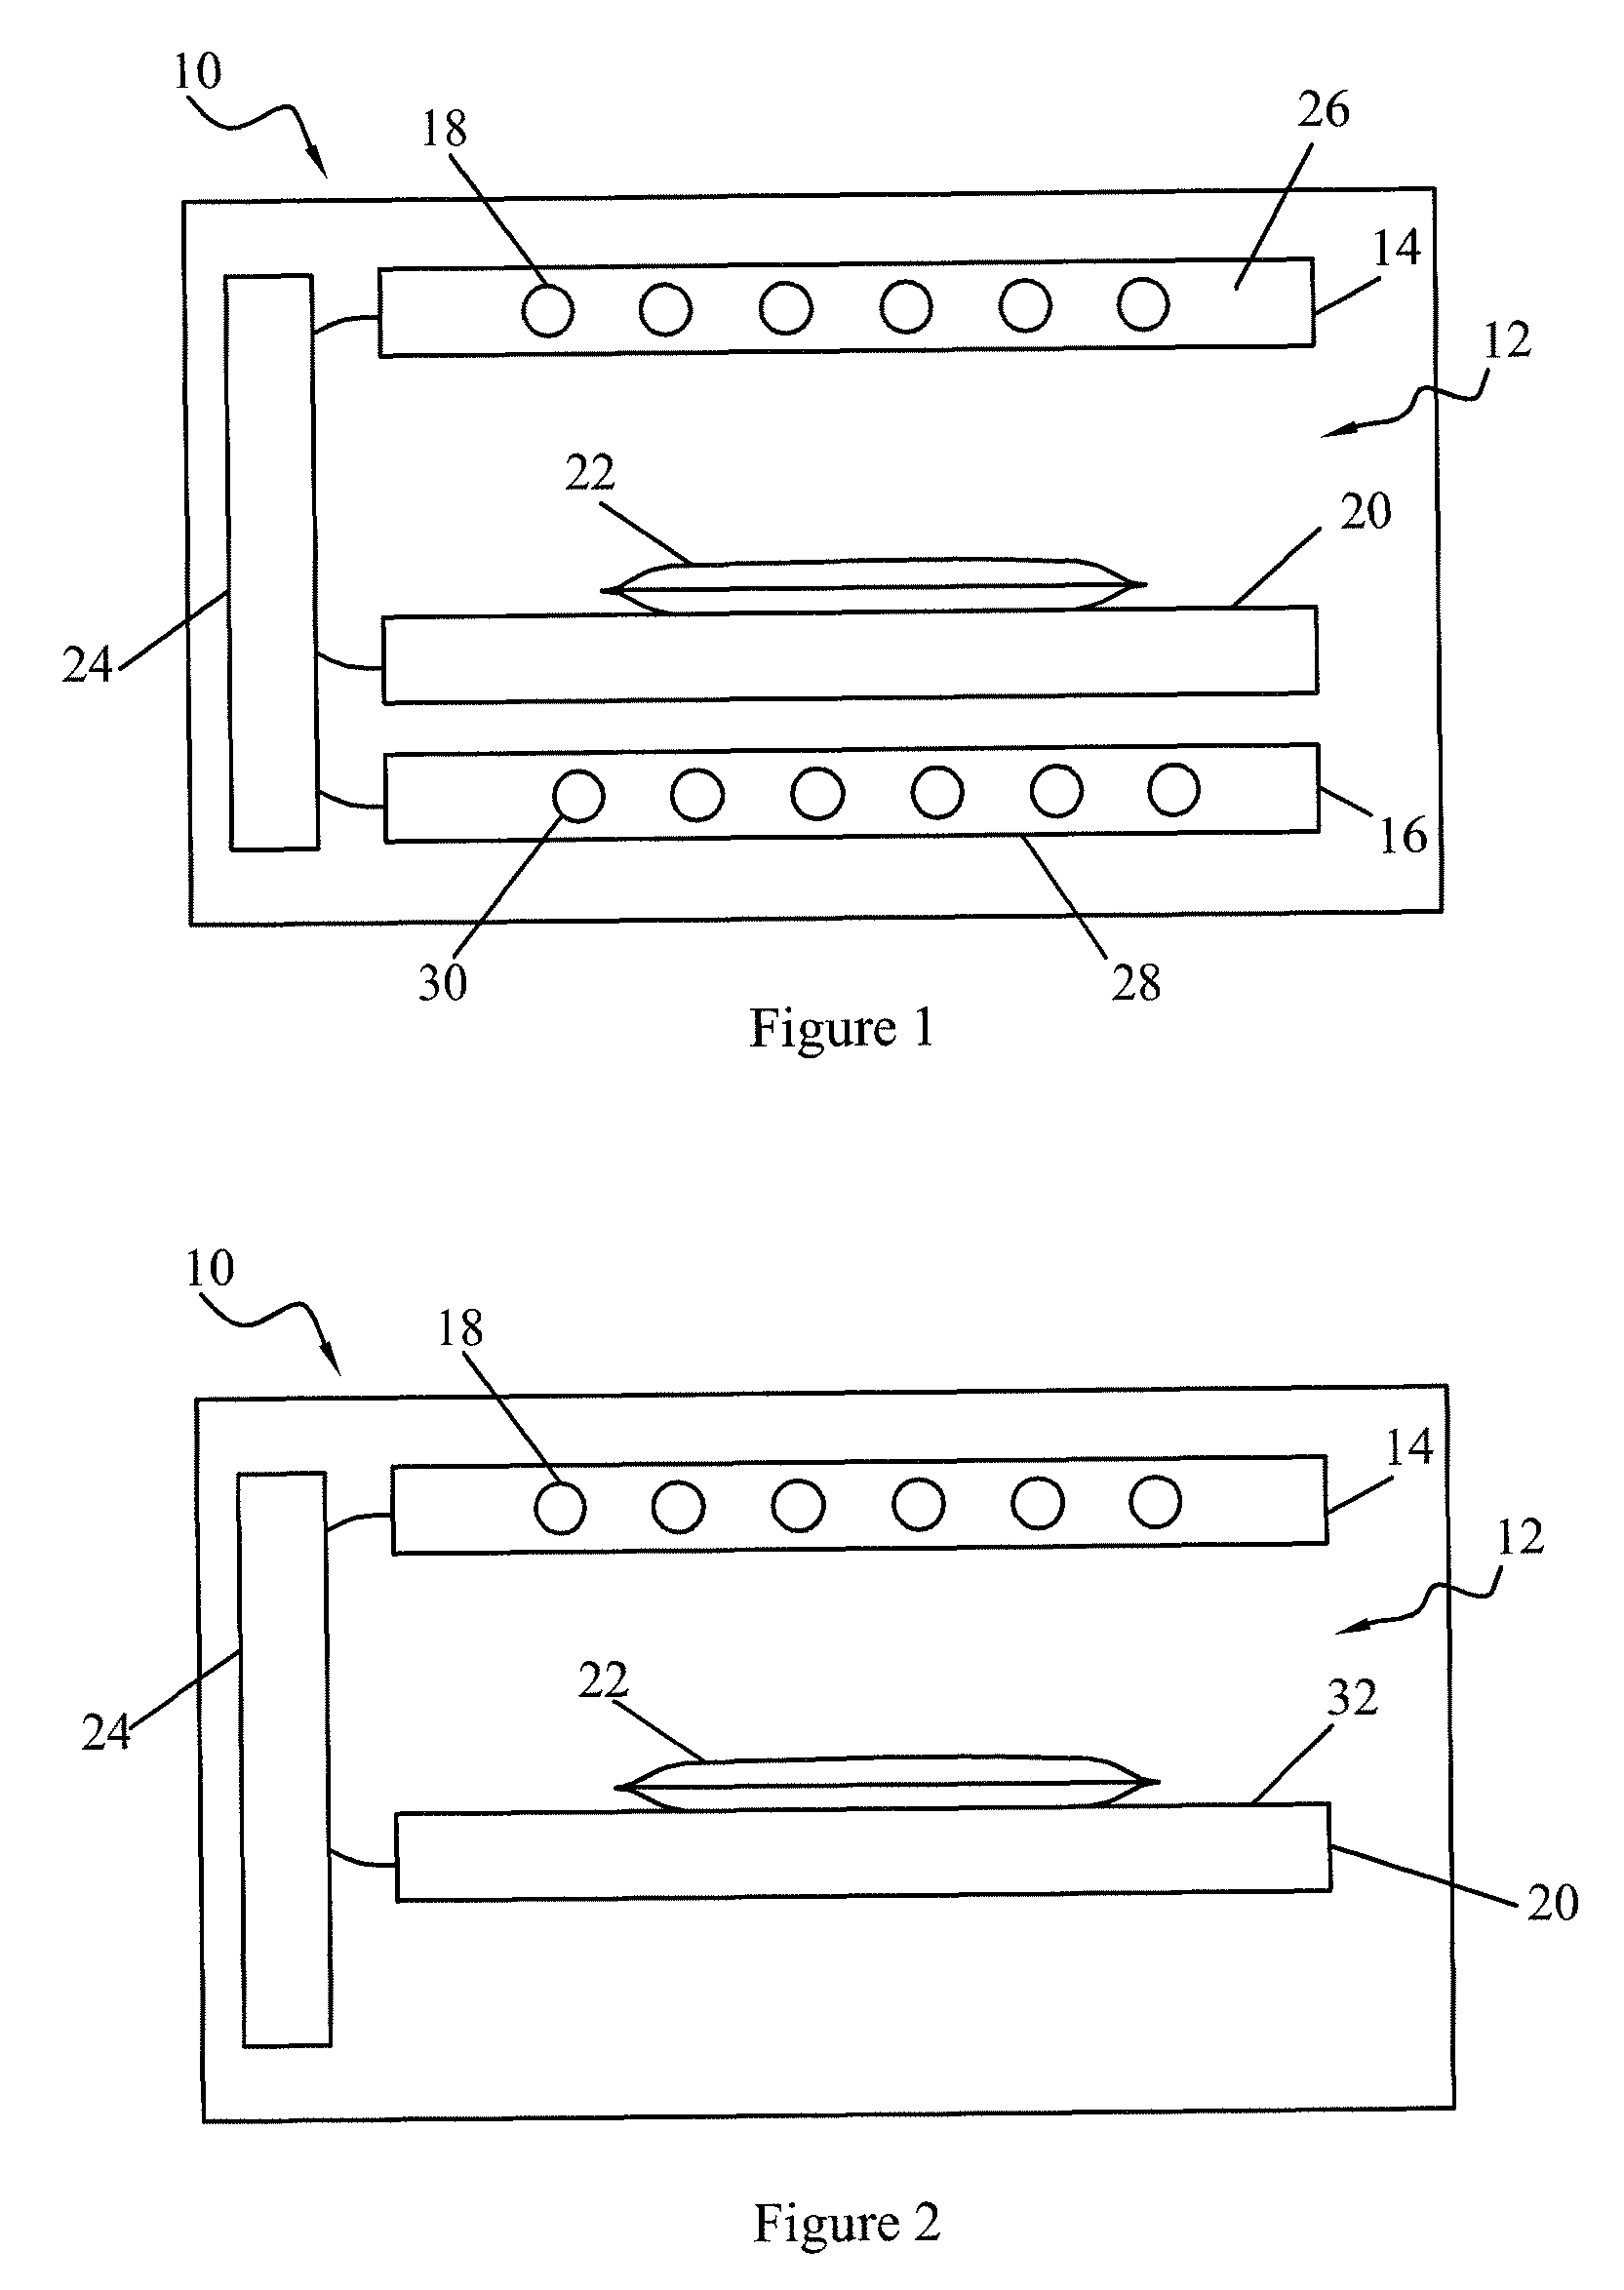 Apparatus for photo reduction of contaminants in blood and blood products with calibration means